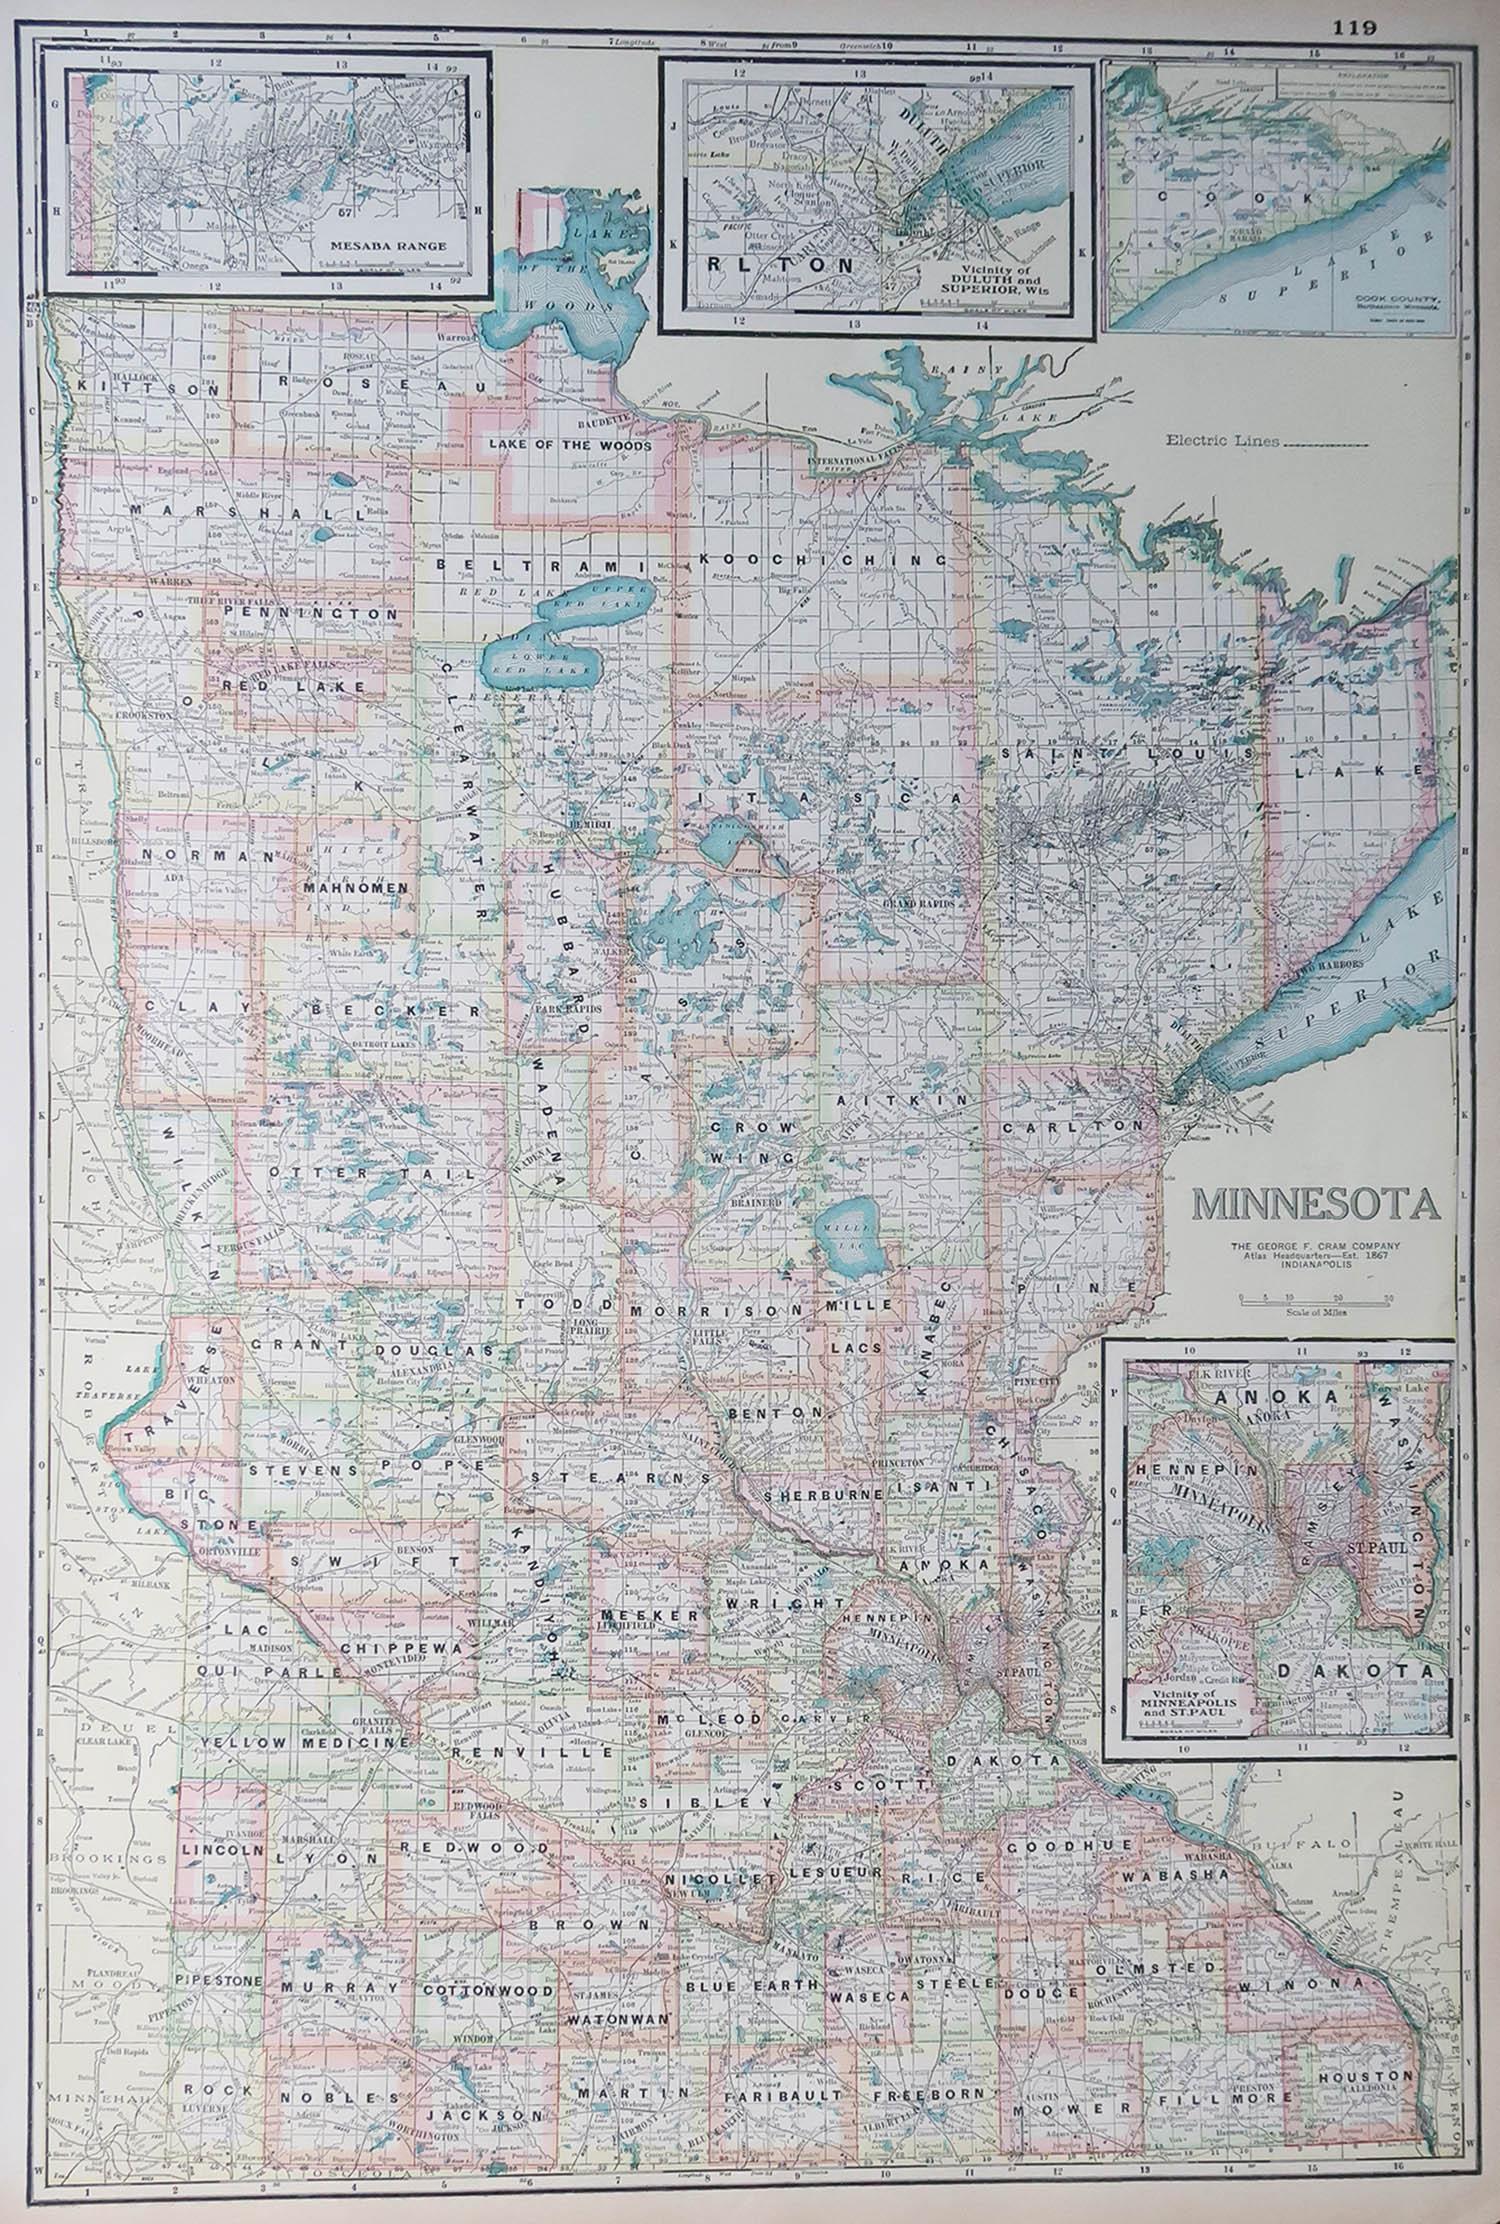 Fabulous map of Minnesota

Original color

Engraved and printed by the George F. Cram Company, Indianapolis.

Published, C.1900

Unframed

Repair to a small tear bottom left corner

Free shipping.